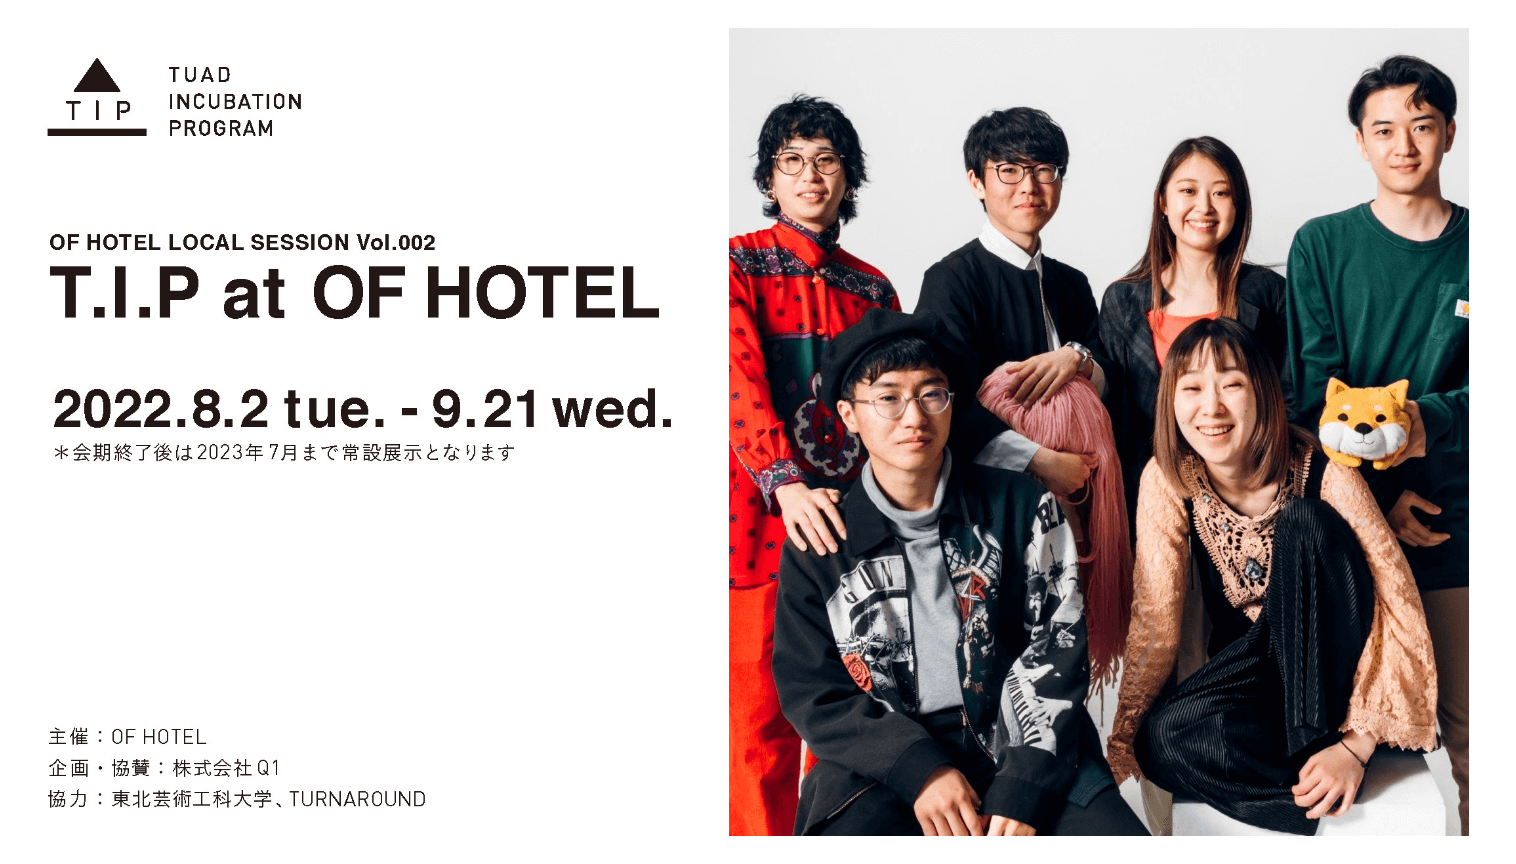 T.I.P at OF HOTEL｜OF HOTEL LOCAL SESSION Vol.002 ｜ イベント ｜ OF HOTEL（オブ